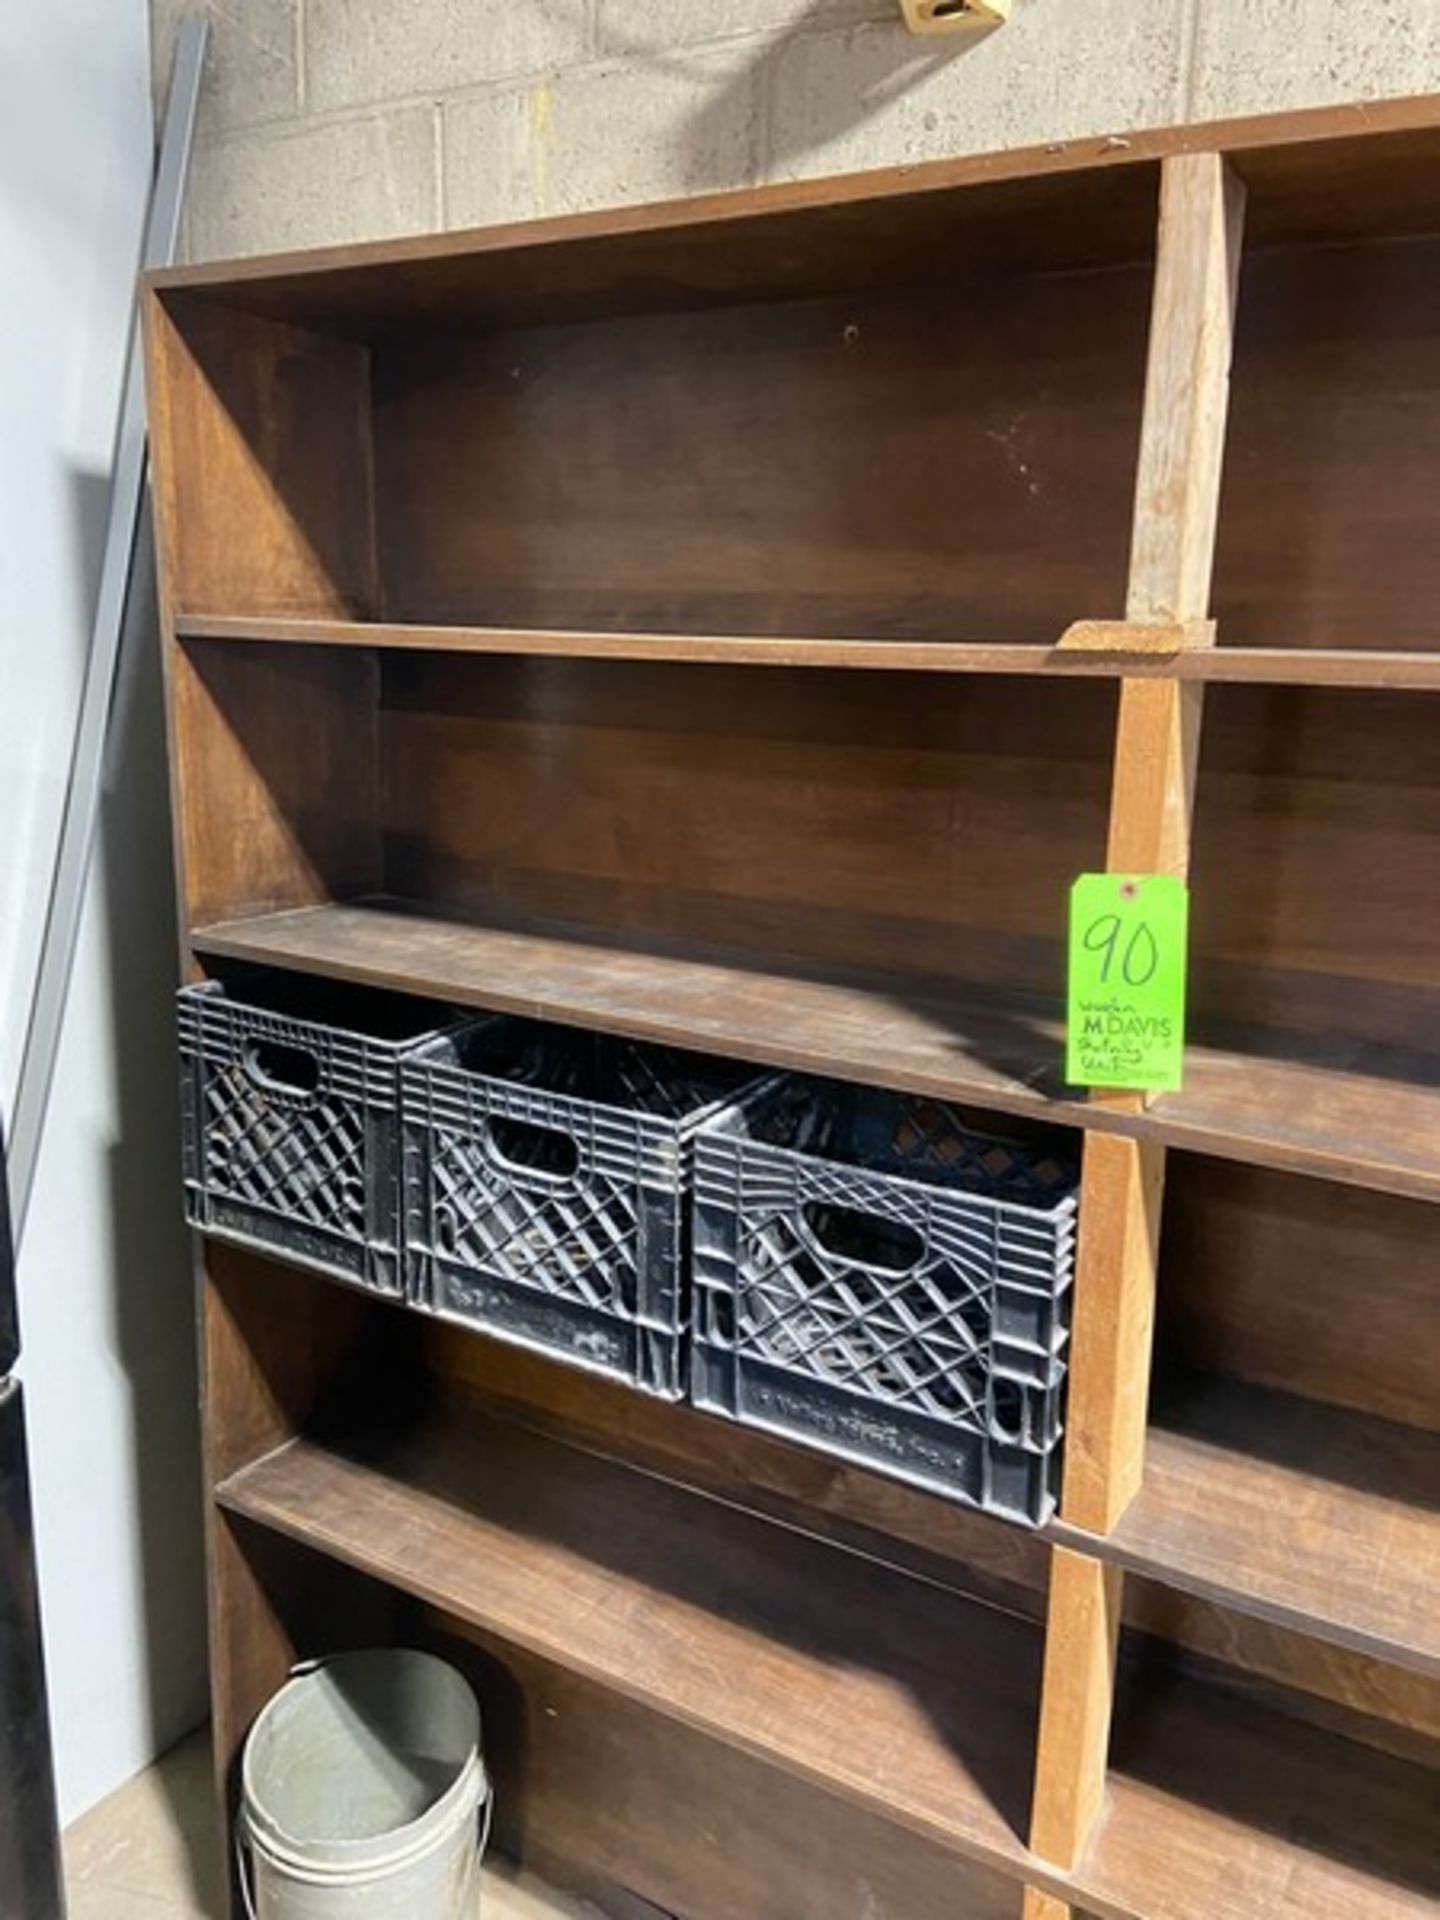 (1) Wooden Shelving Unit, Overall Dims. Aprox. 81-3/8” L x 12” W x 79” H (LOCATED IN MONROEVILLE,